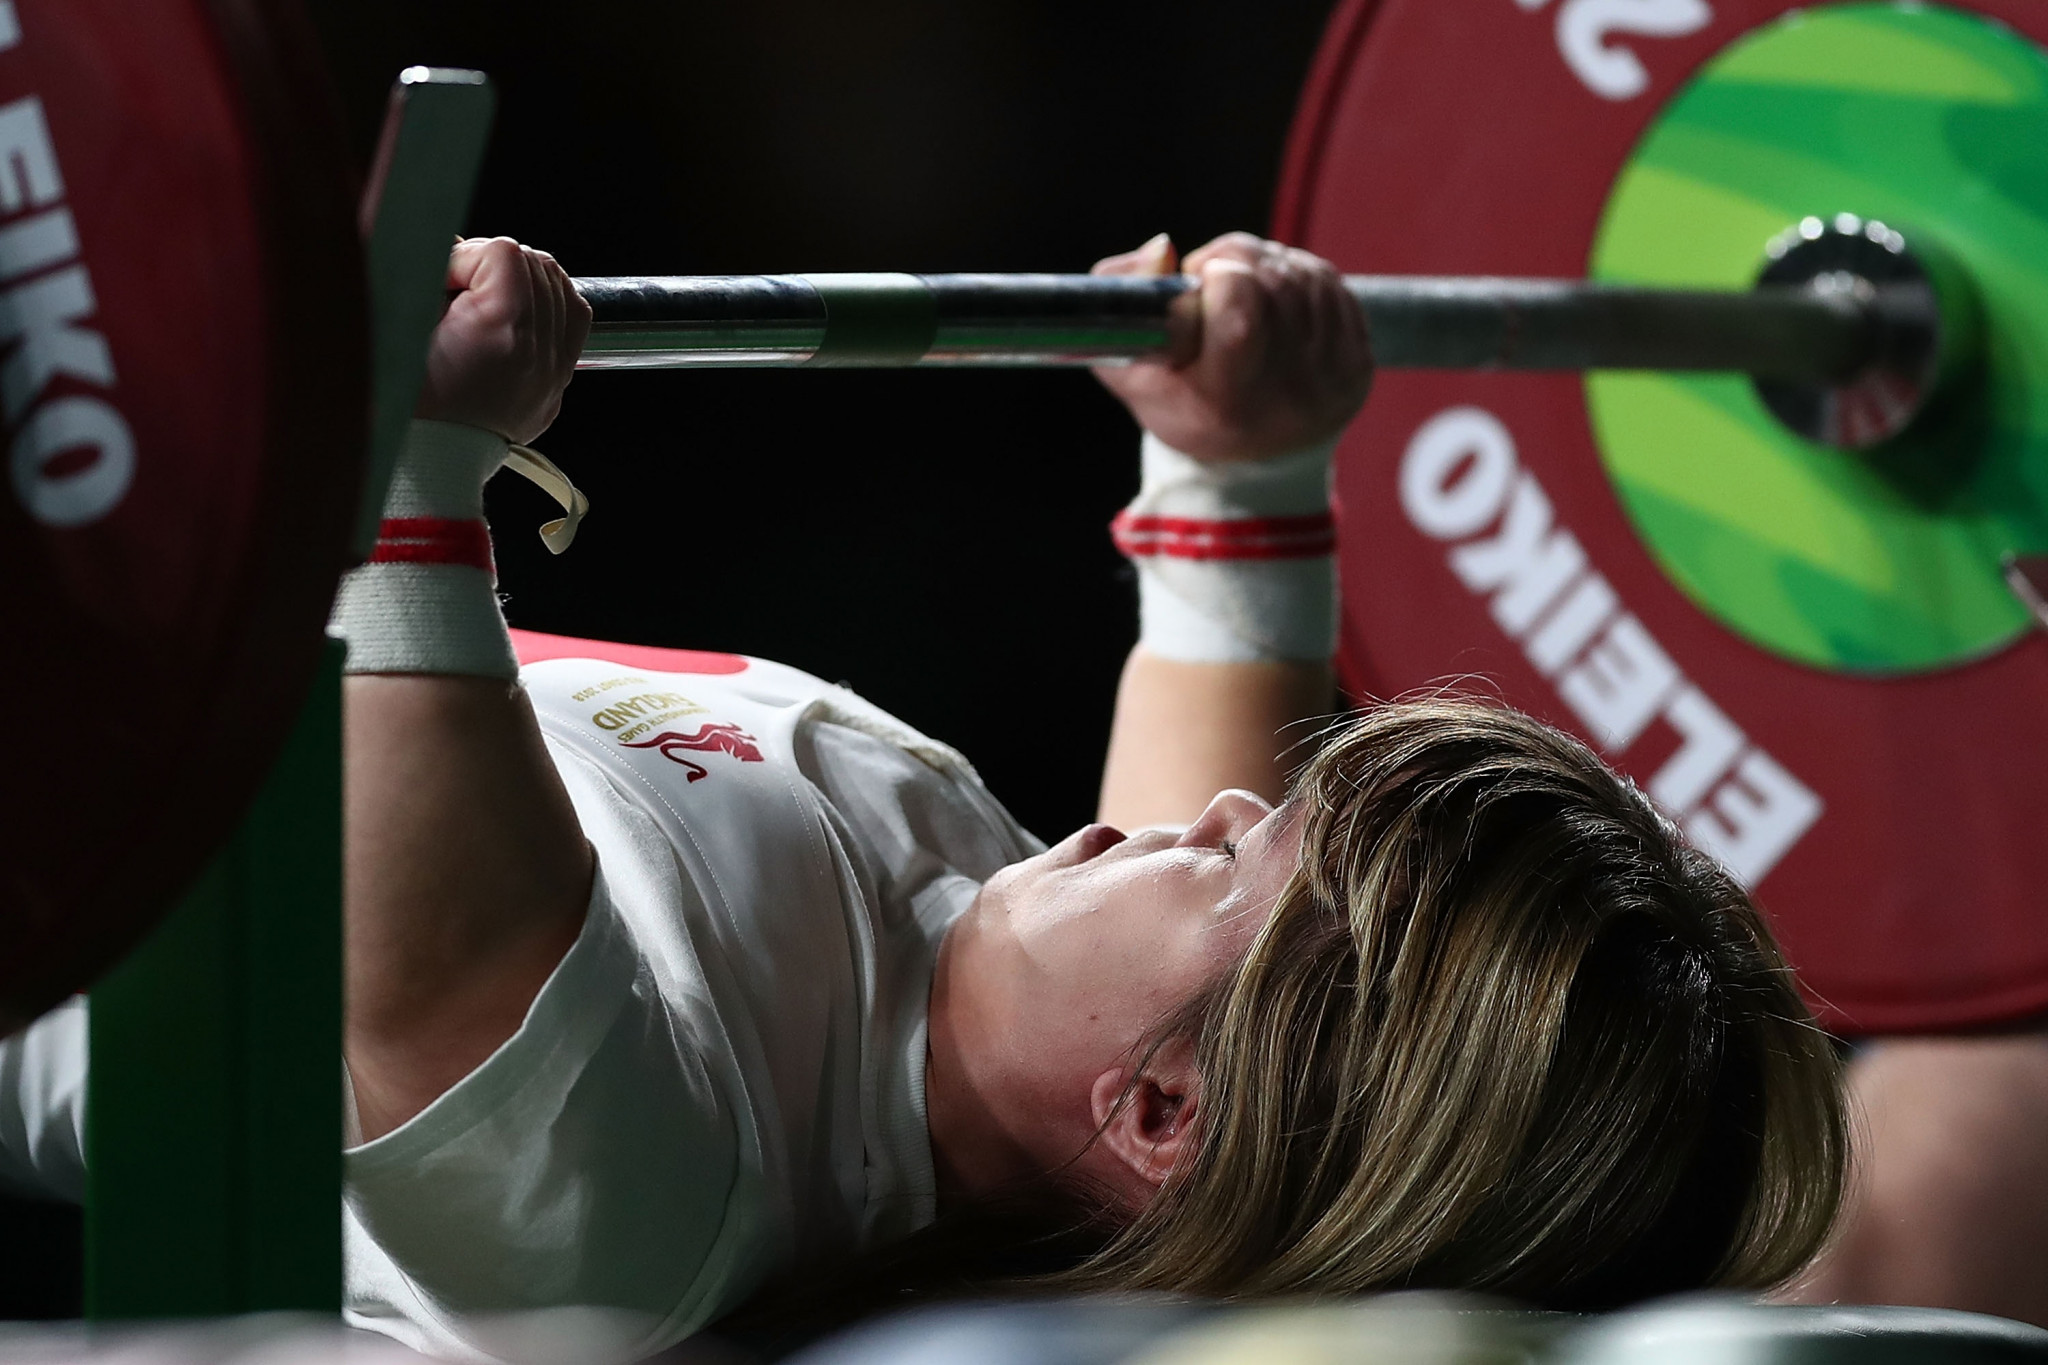 Newson among Tokyo 2020 hopefuls at Powerlifting World Cup in Manchester